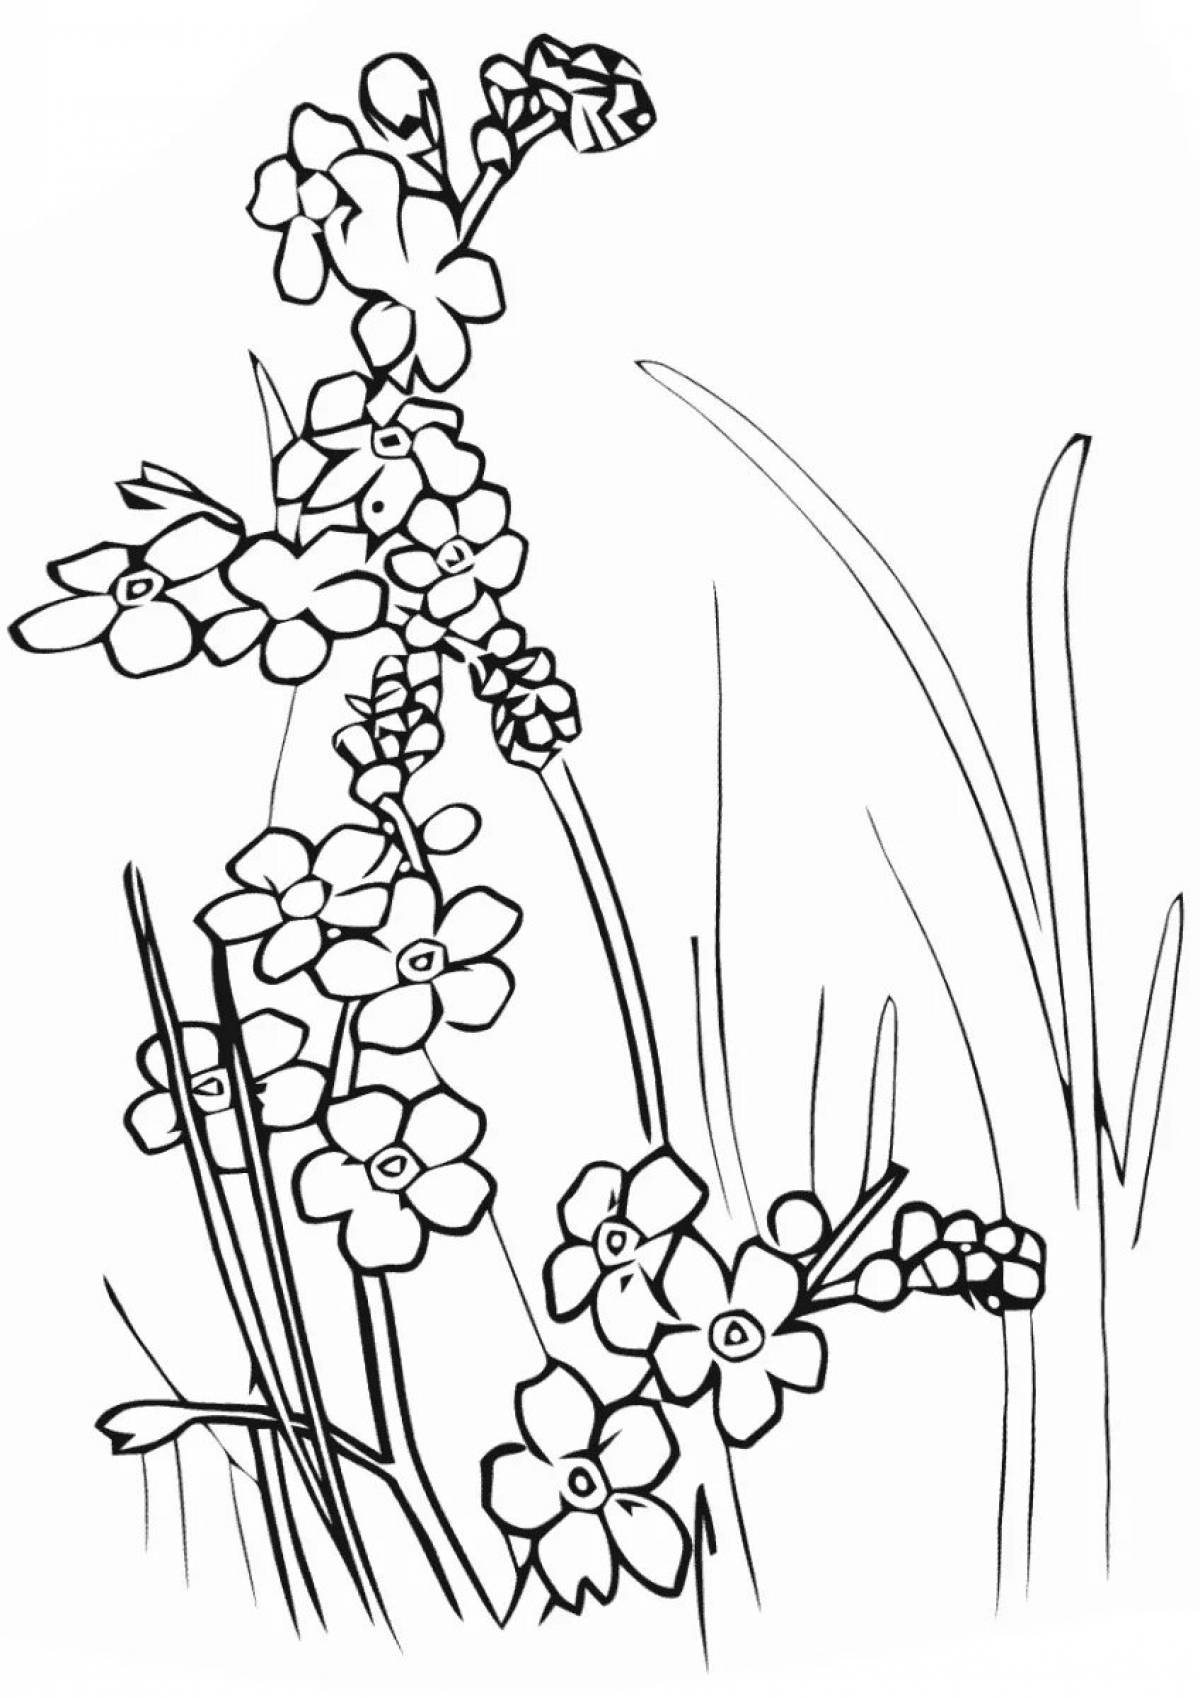 Coloring dreamy forget-me-not flower